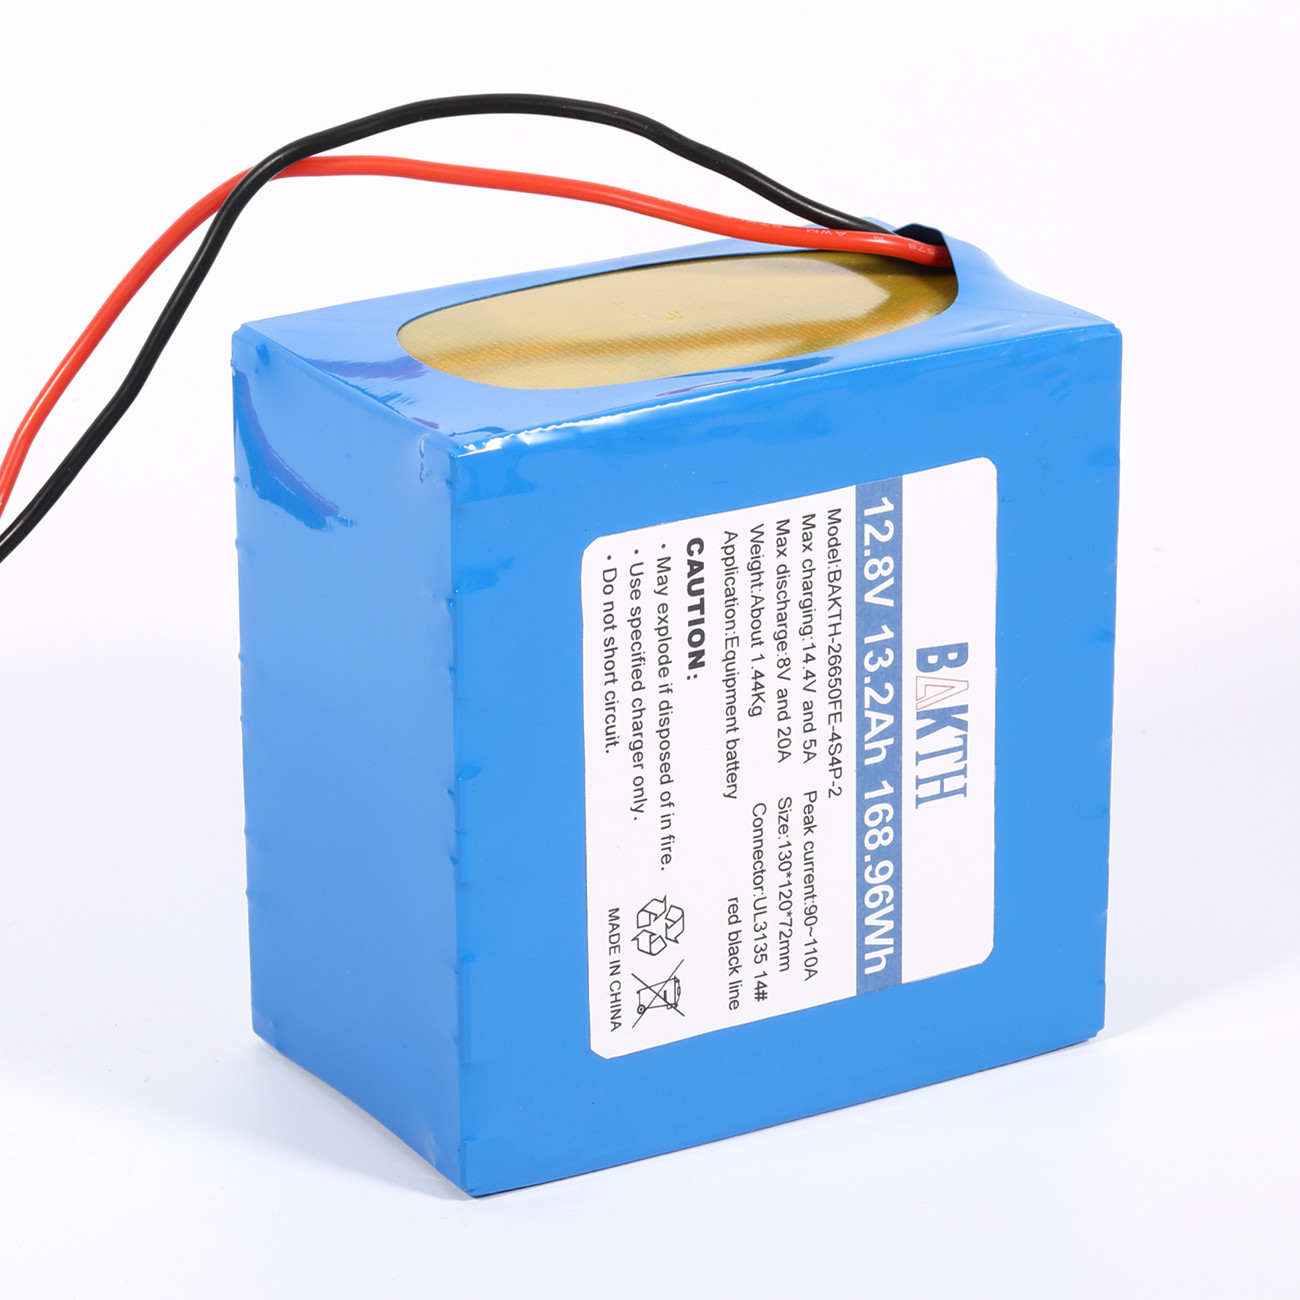 flat 10ah LiFePO4 battery cell for electric cars